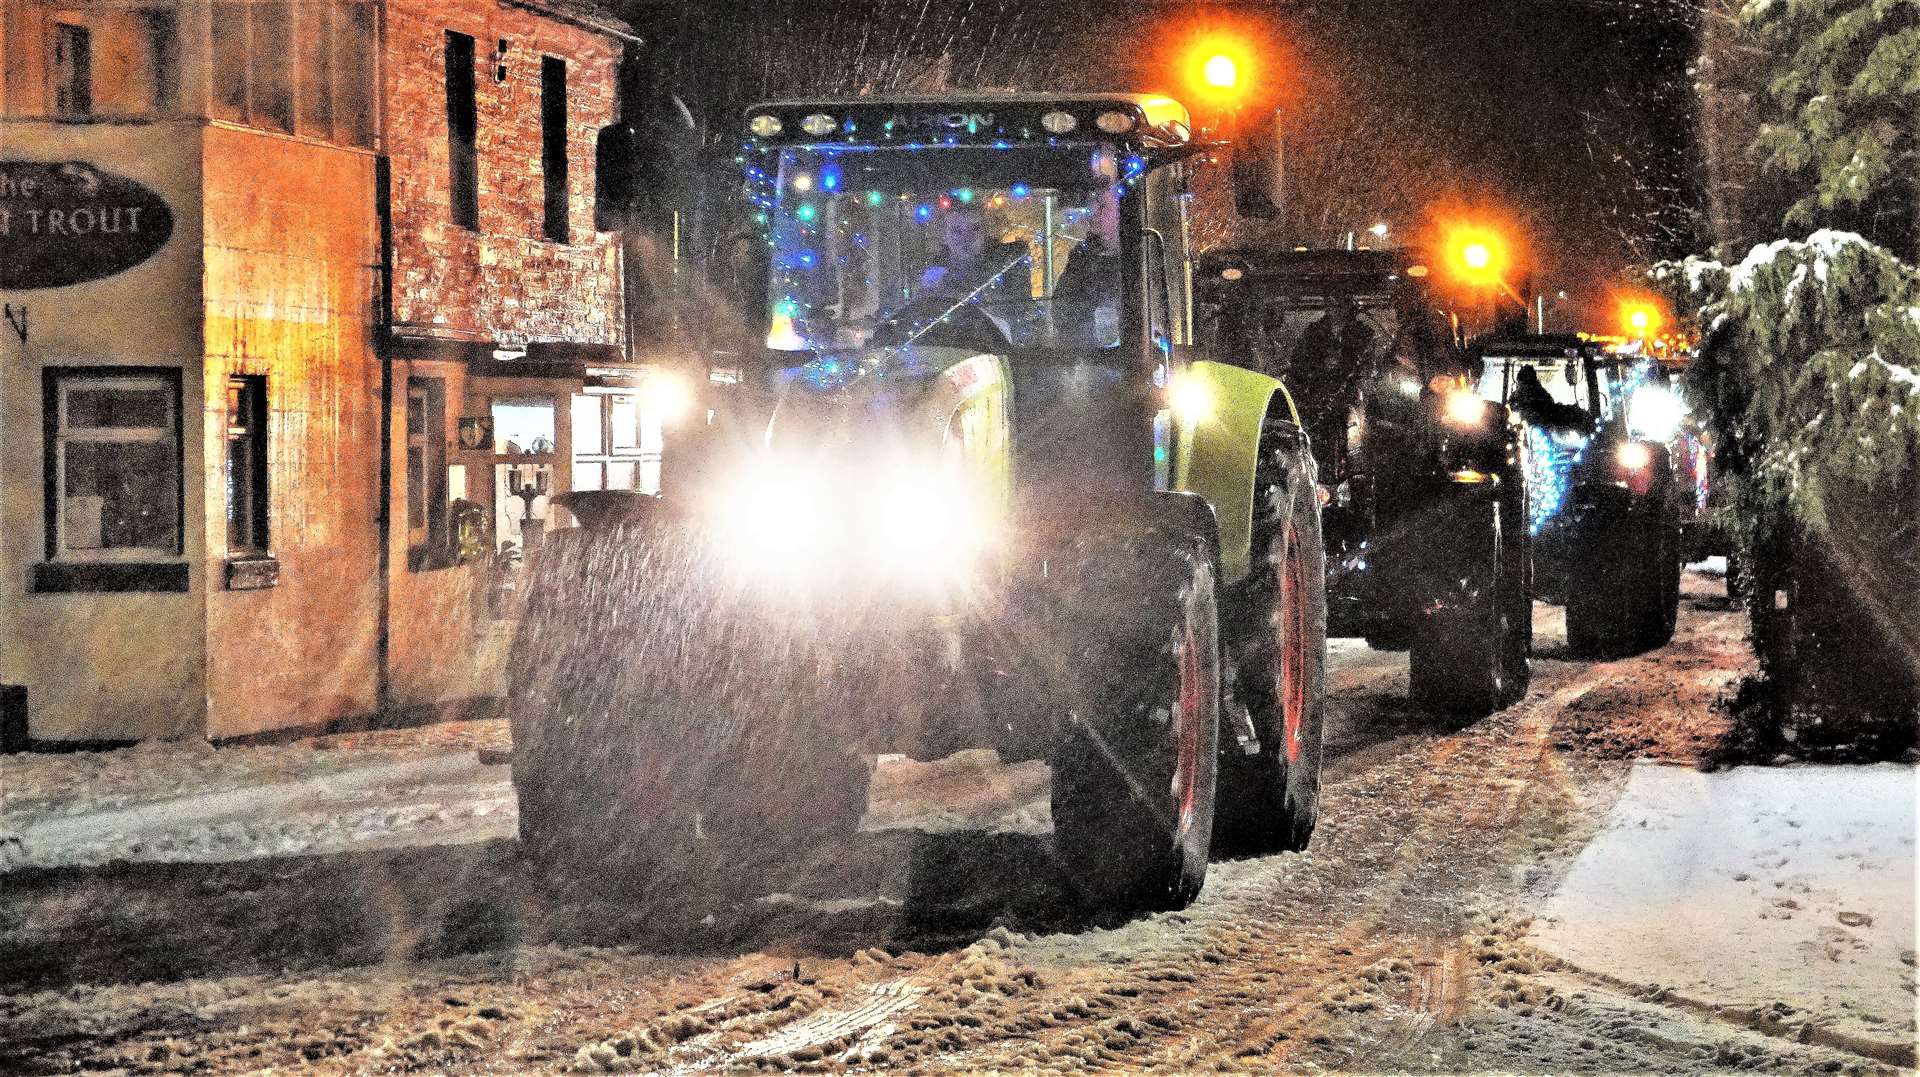 The Caithness centenary year celebrations began over the festive season with a convoy of tractors taking part in a fundraising journey around the county. Picture: DGS